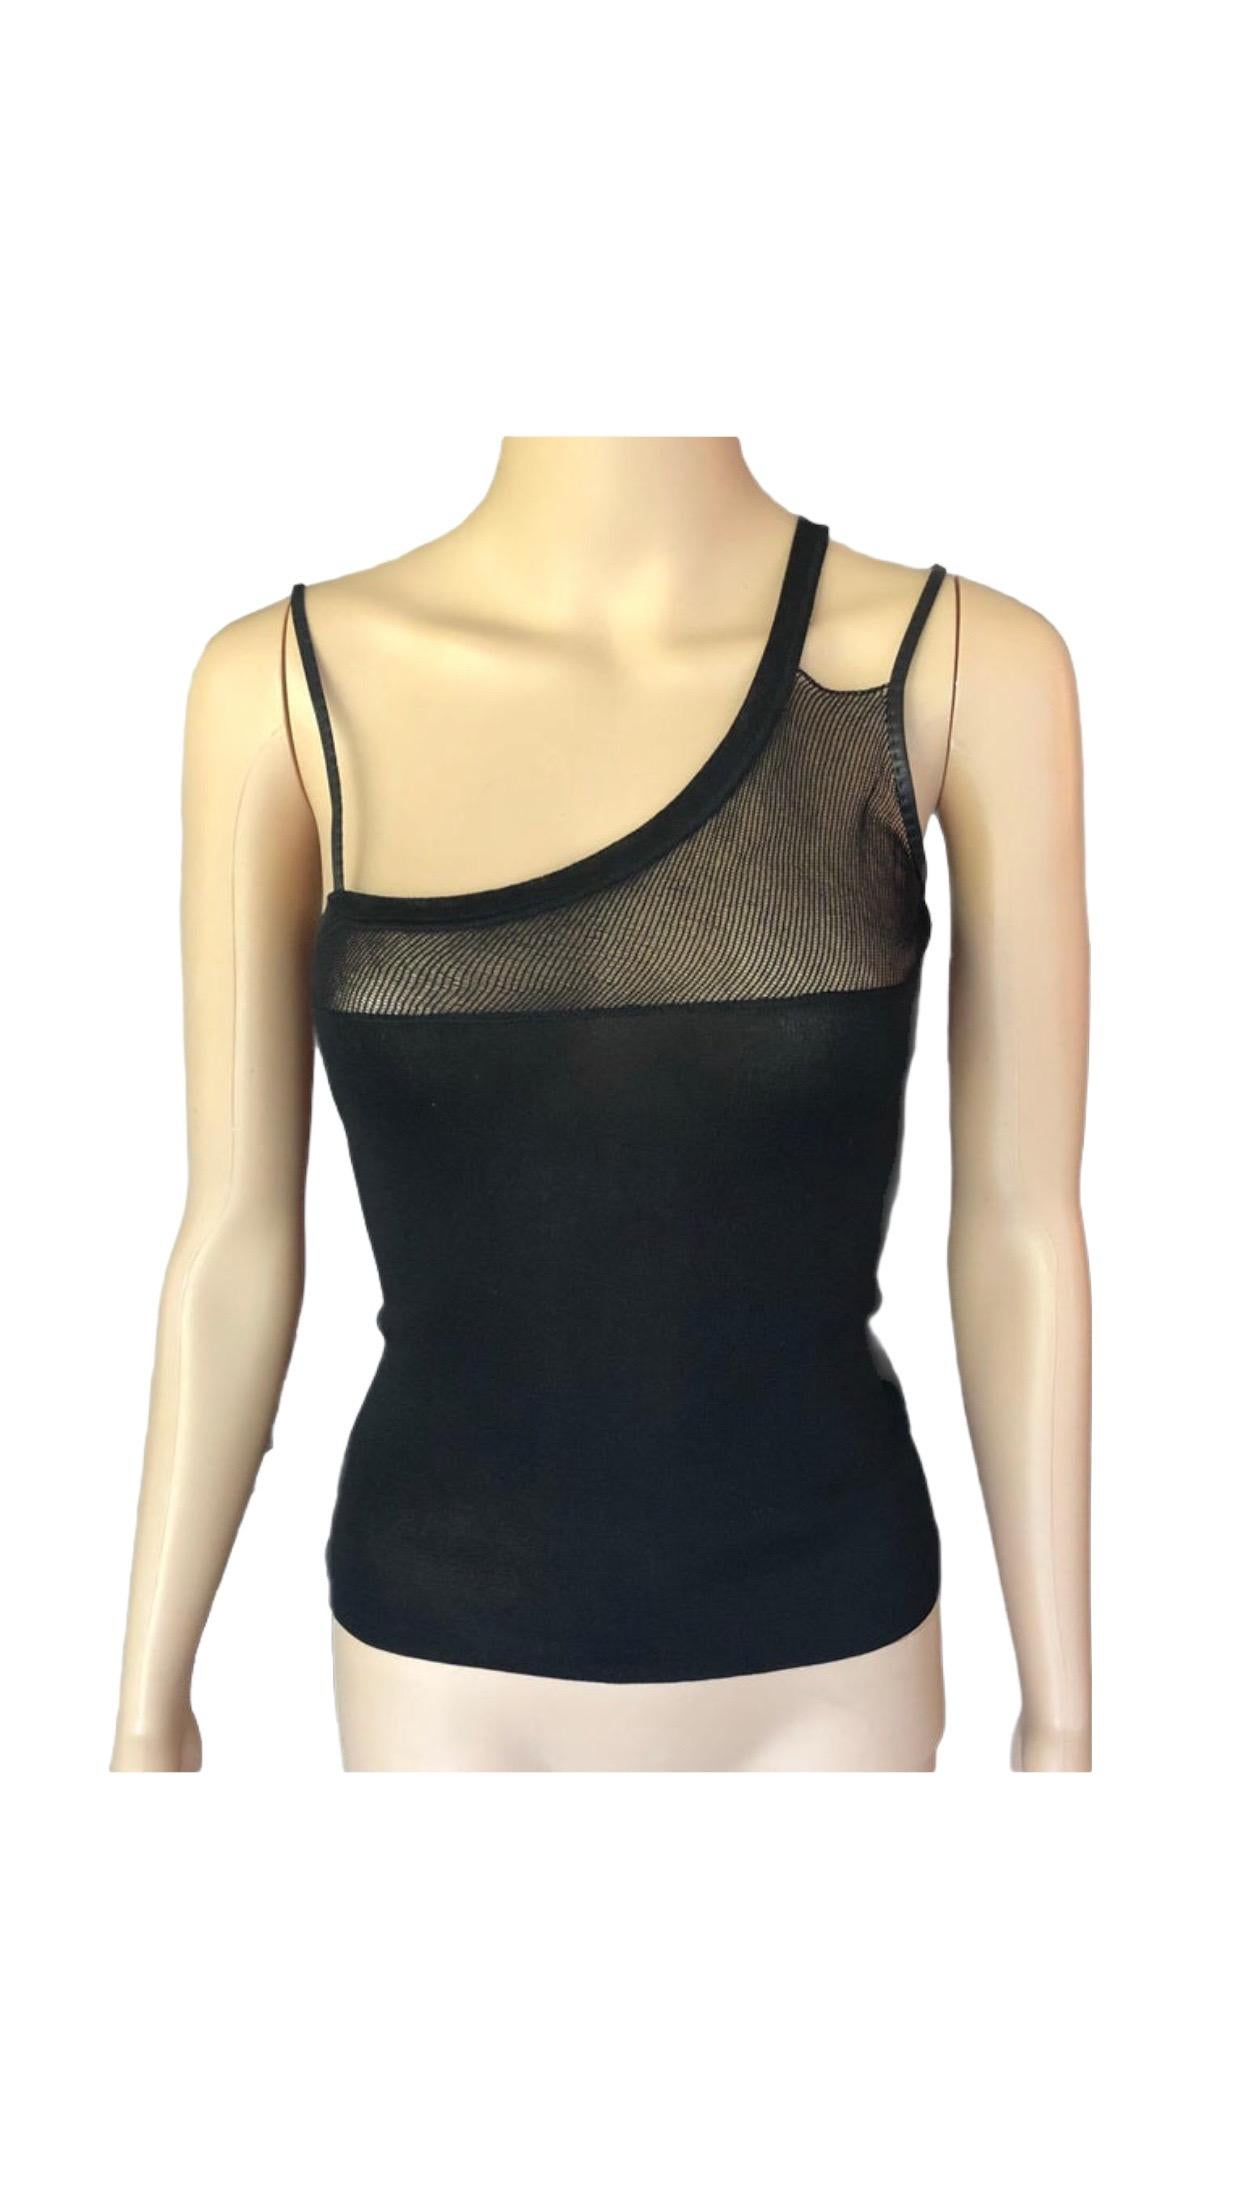 Gucci by Tom Ford Semi Sheer Knit Black Top In Good Condition For Sale In Naples, FL